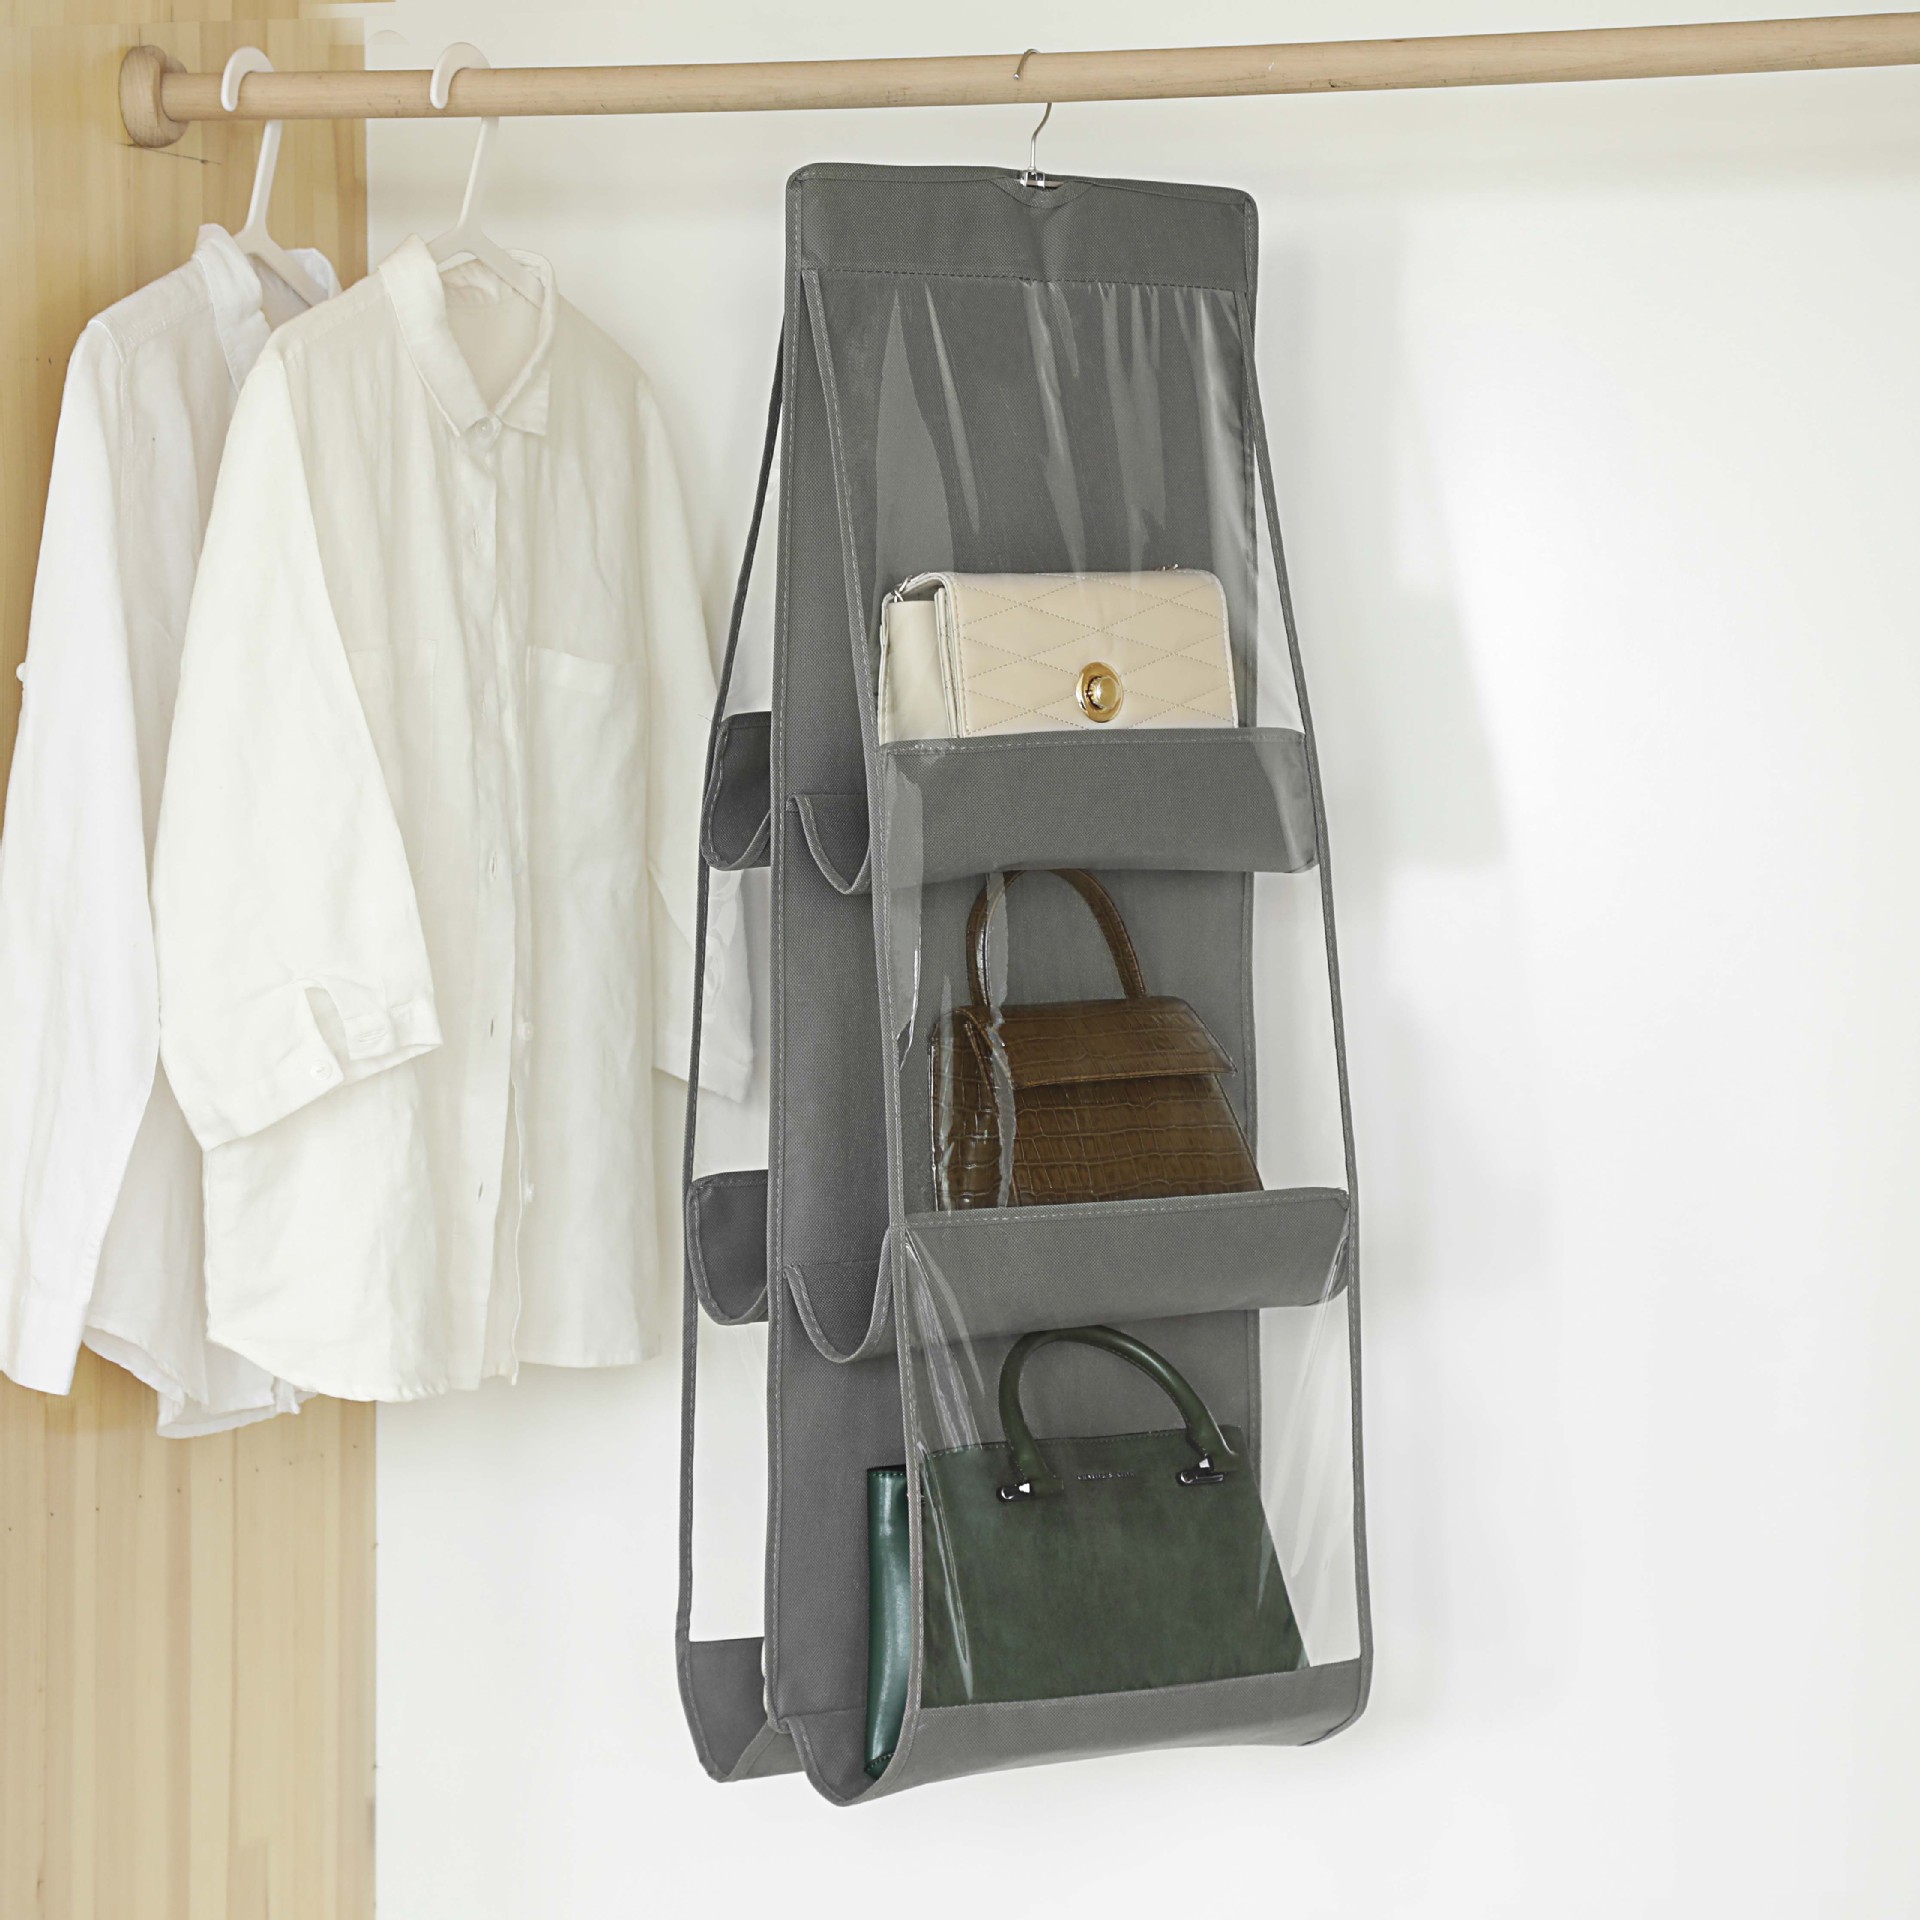 🔥HOT SALE 60% OFF🔥DOUBLE-SIDED SIX-LAYER HANGING STORAGE BAG